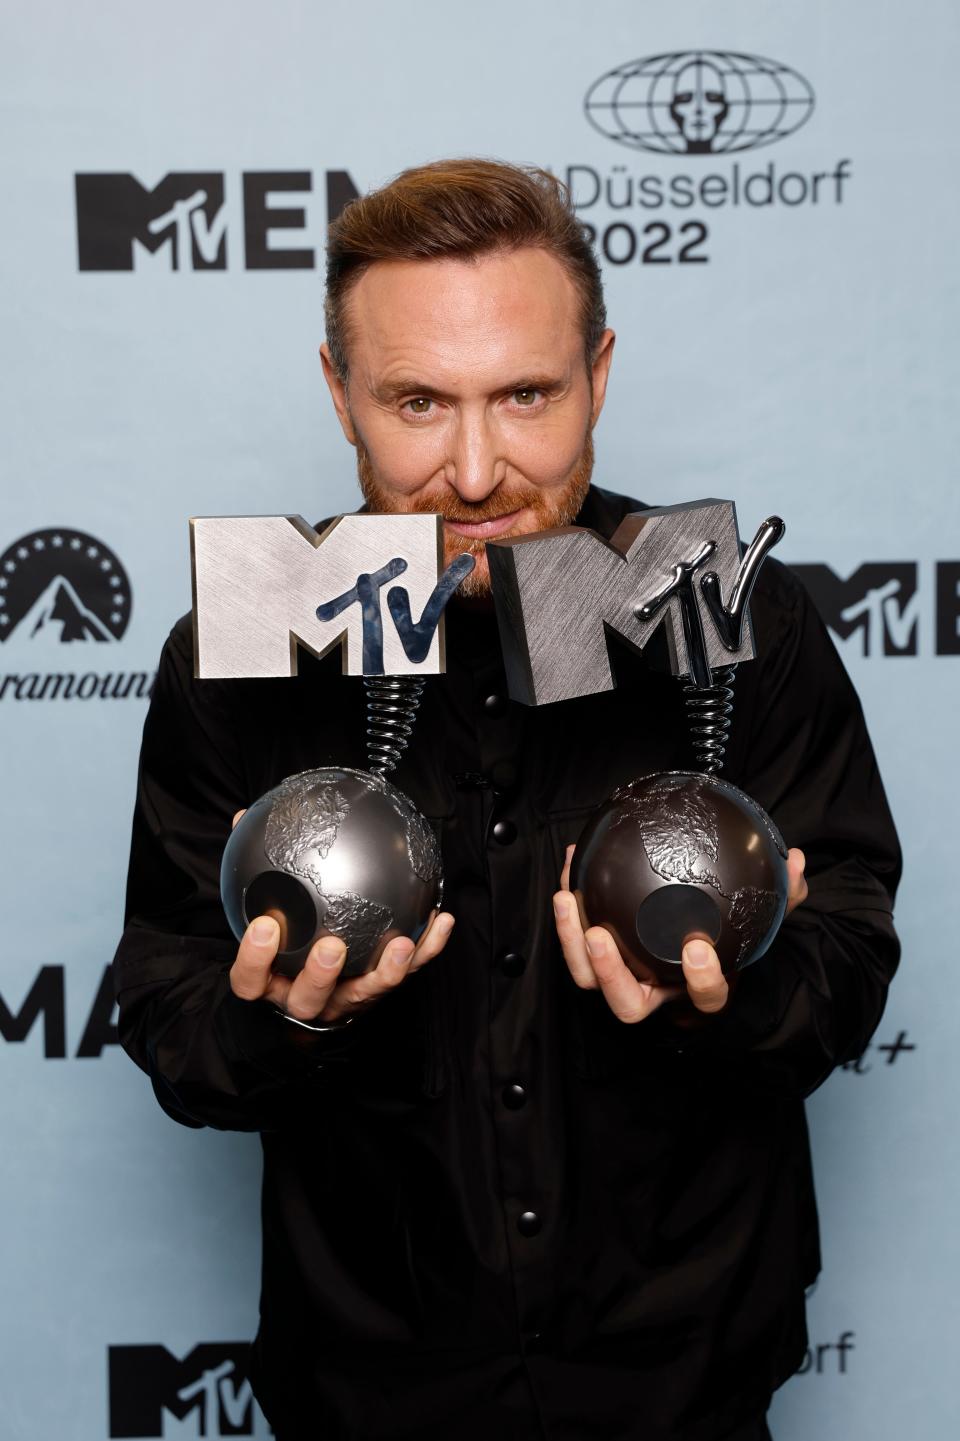 David Guetta poses with the Best Electronic and Best Collaboration awards during the MTV Europe Music Awards 2022 held at PSD Bank Dome on November 13, 2022 in Duesseldorf, Germany.